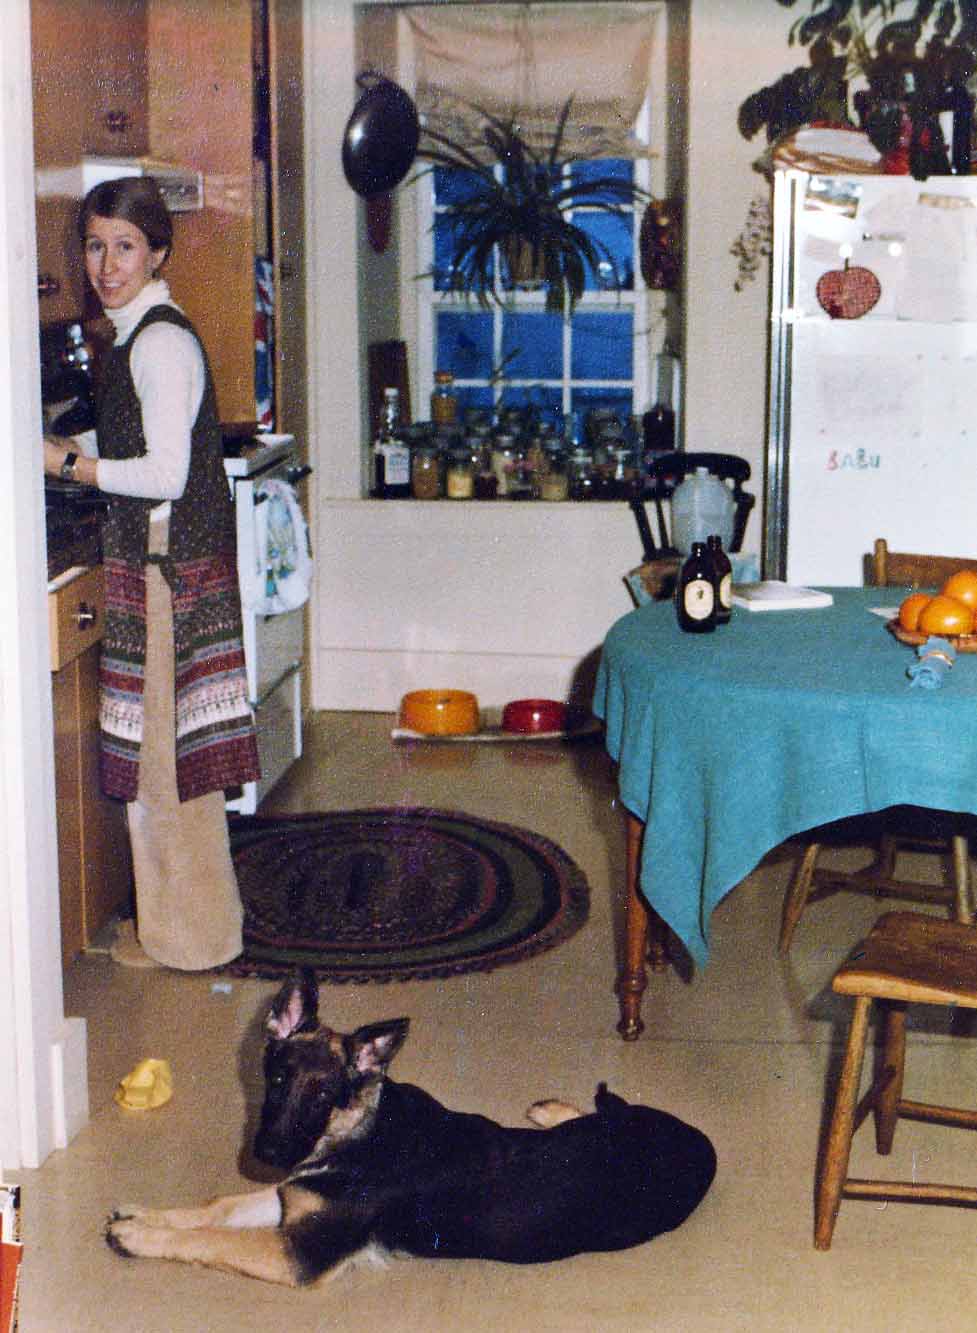 a young woman smiles in this vintage photo, while she stands at the kitchen counter. A young german shepherd dog lays on the kitchen linoleum floor.